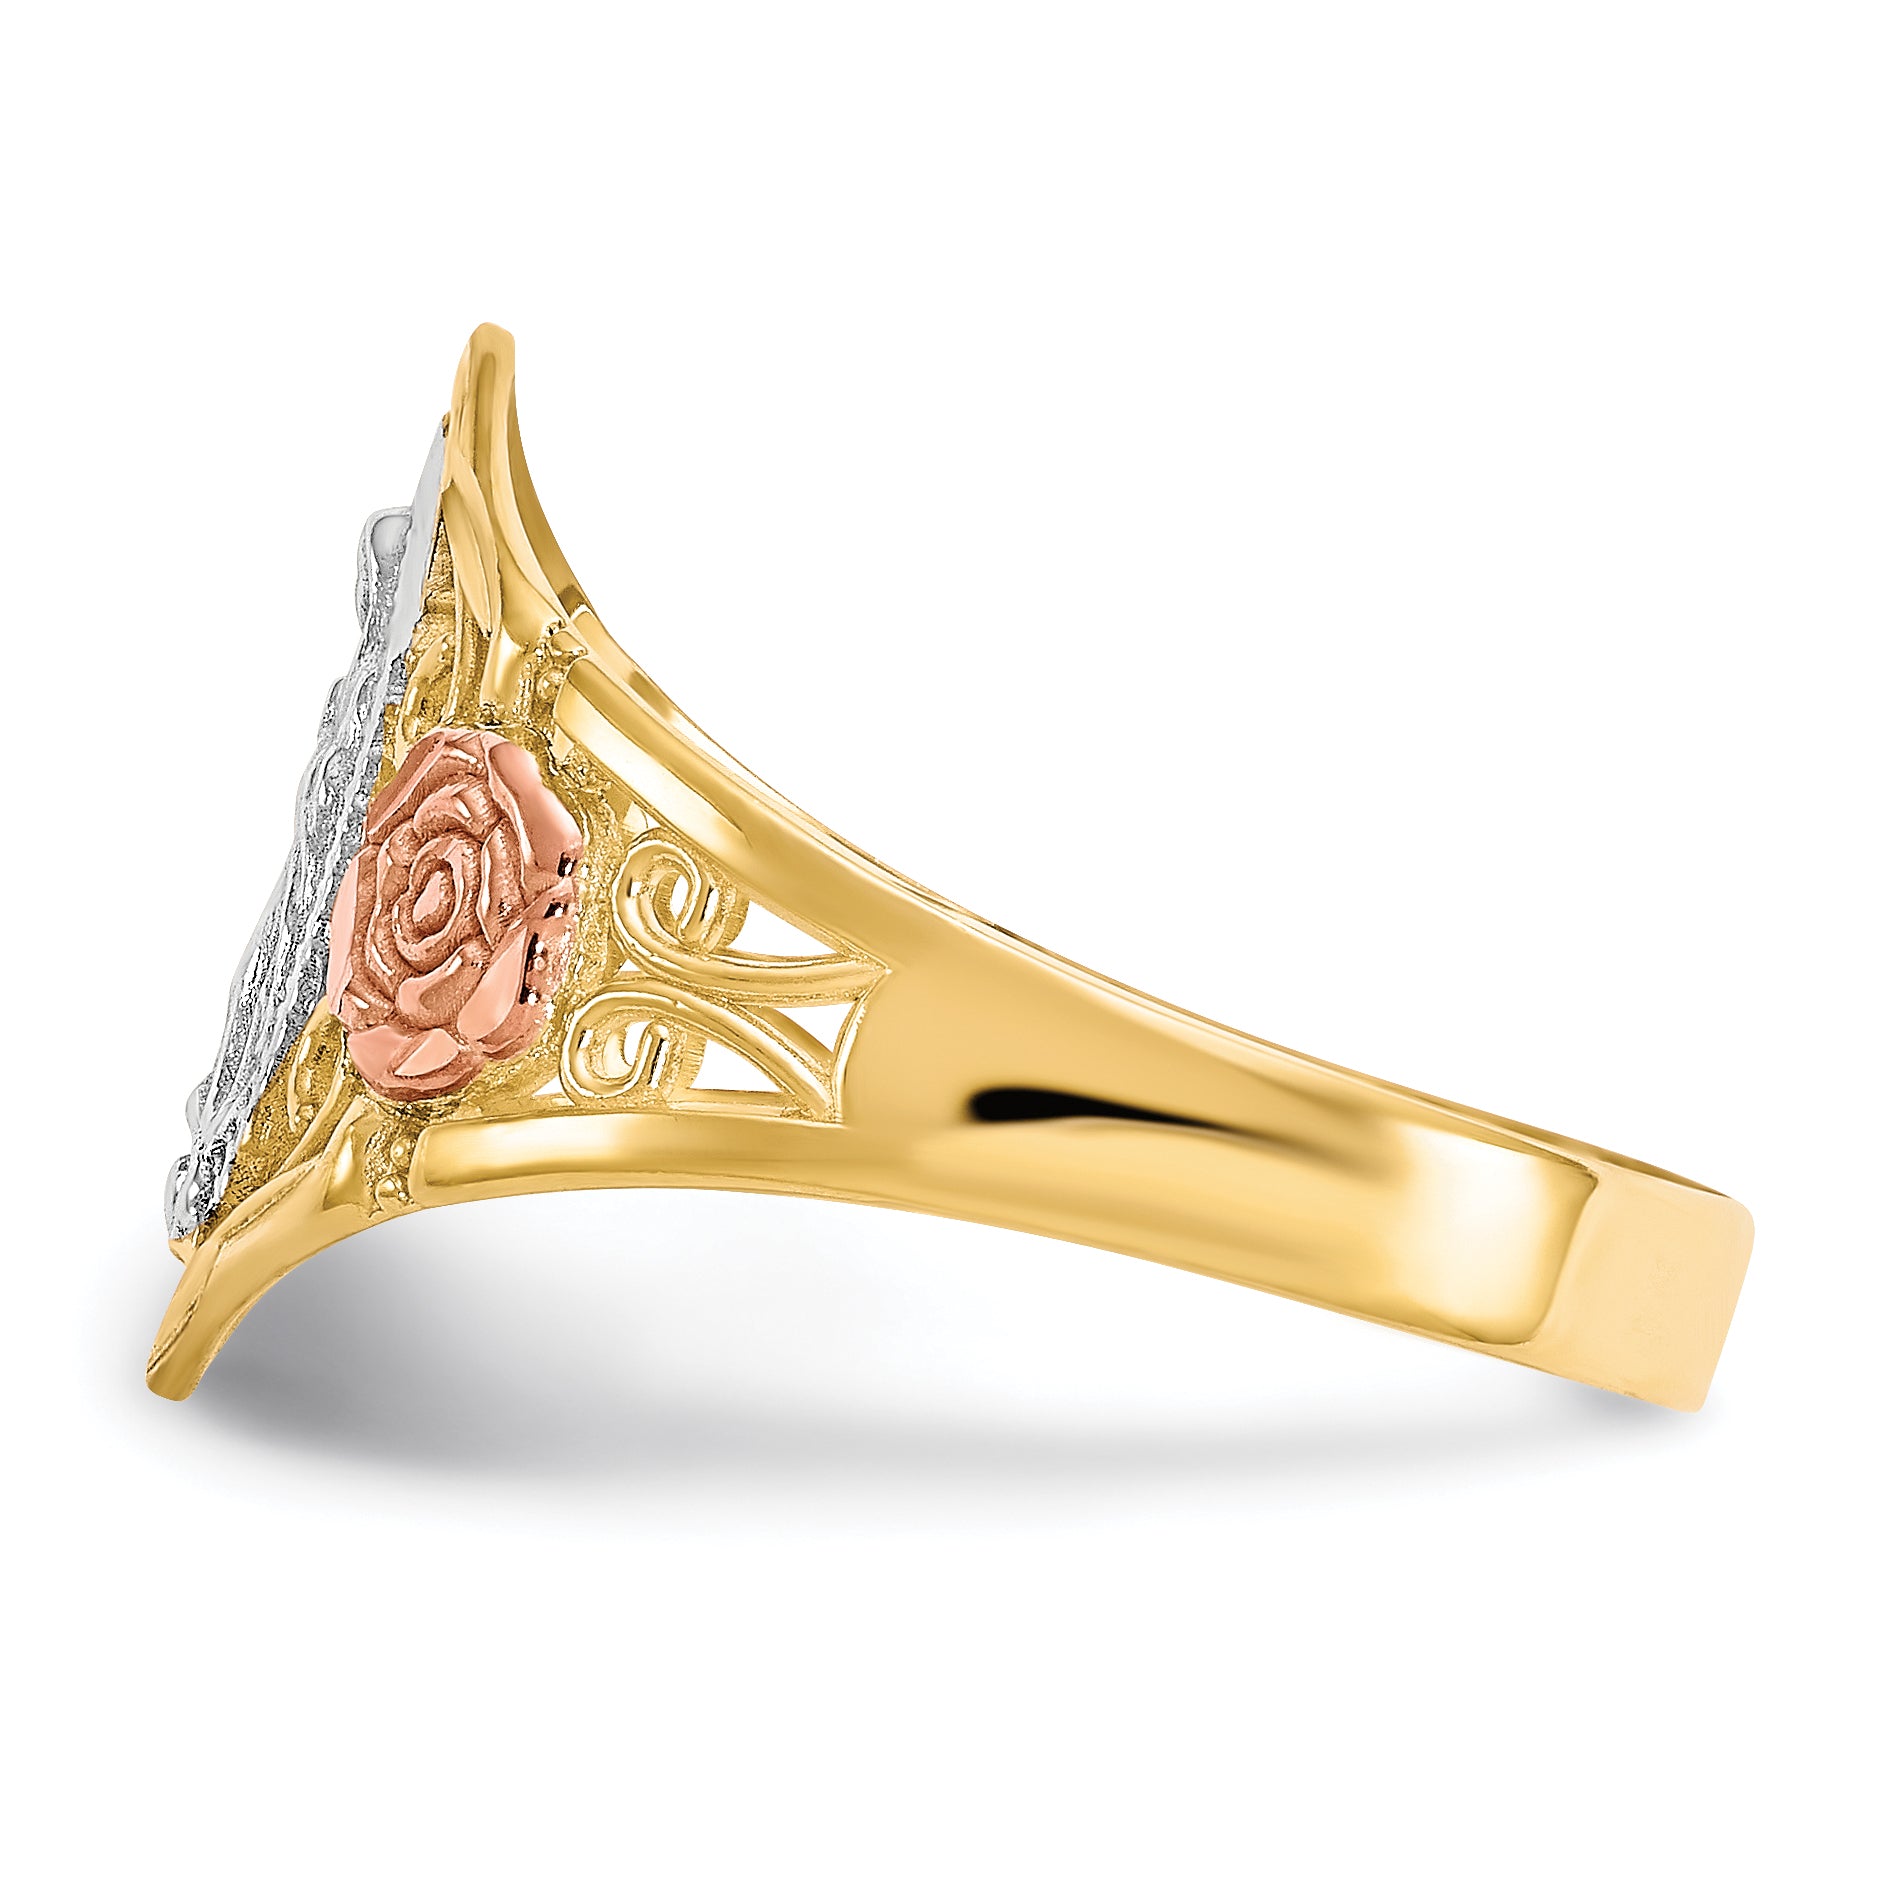 10k Two-tone & Rhodium Our Lady of Guadalupe Ring